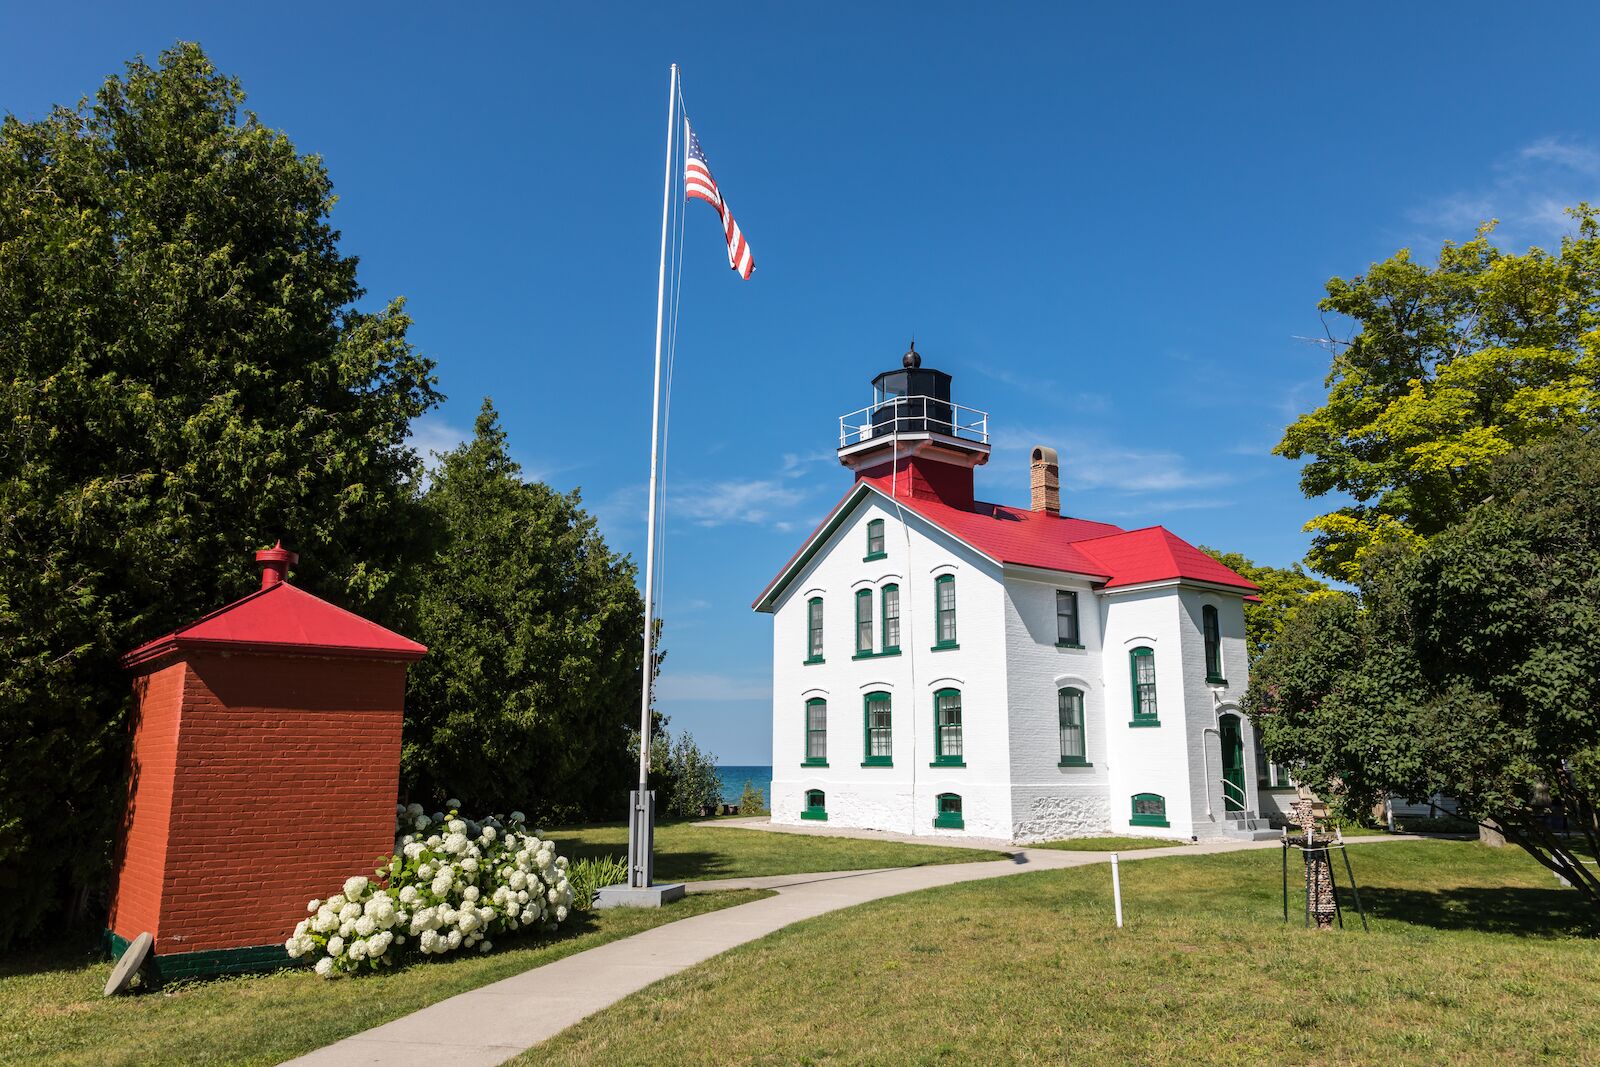 Grand Traverse Lighthouse, one of the few Michigan lighthouses you can spend the night at